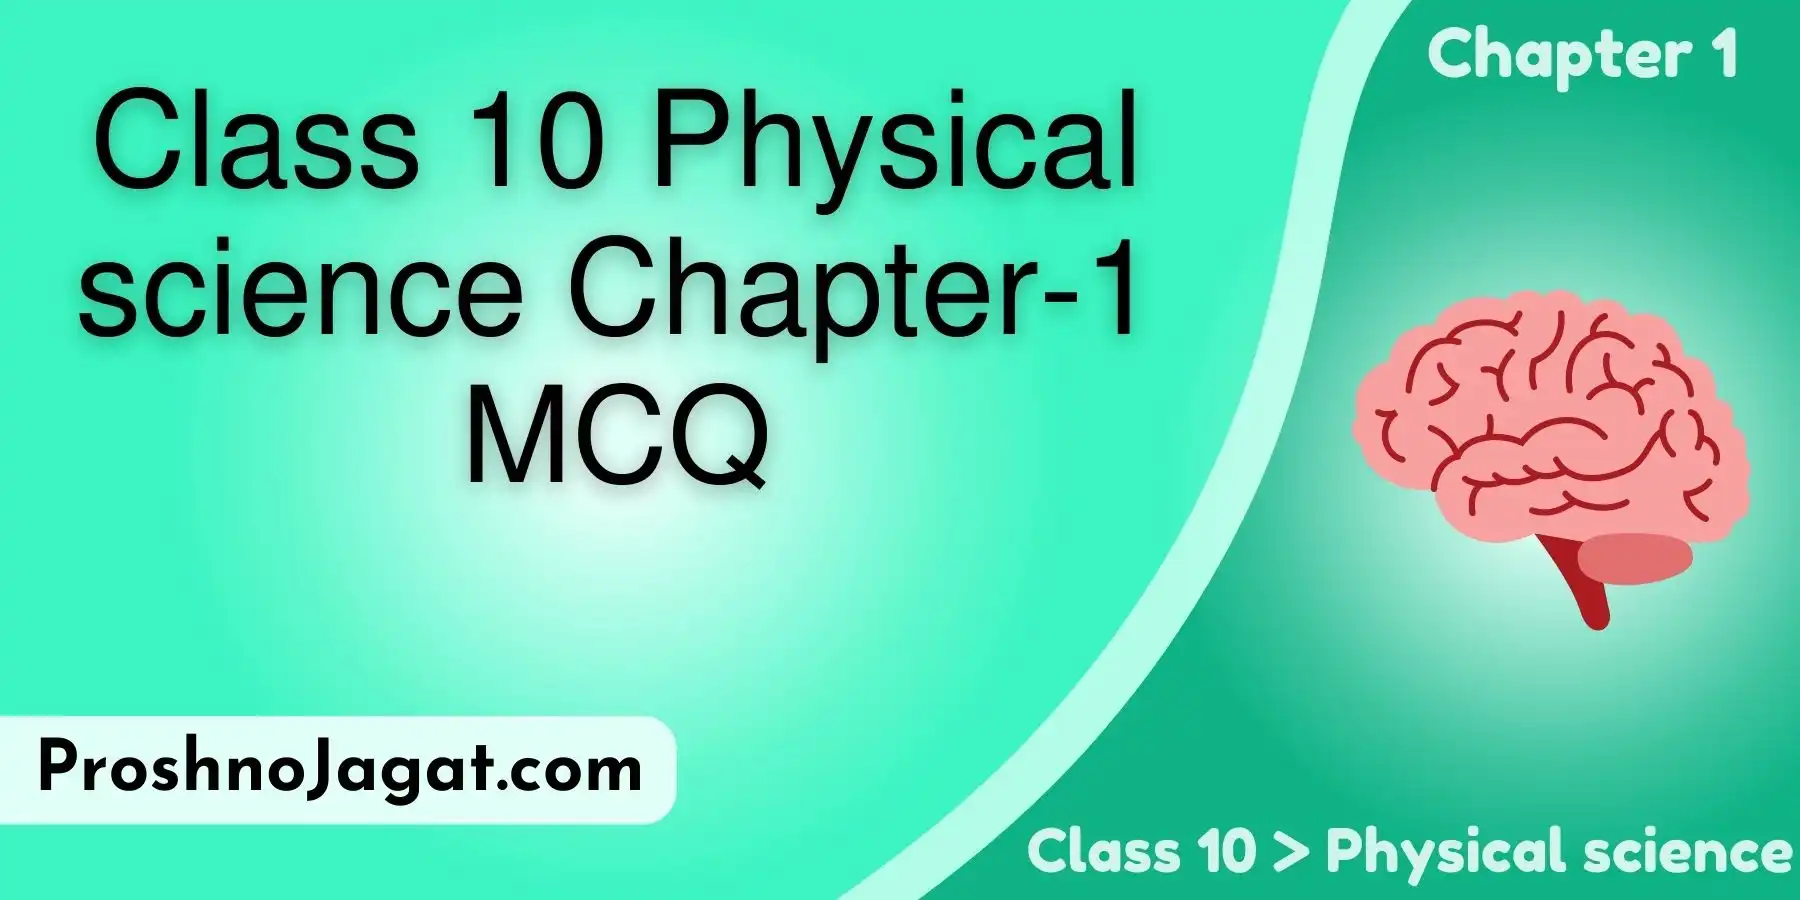 Class 10 Physical science Chapter 1 MCQ